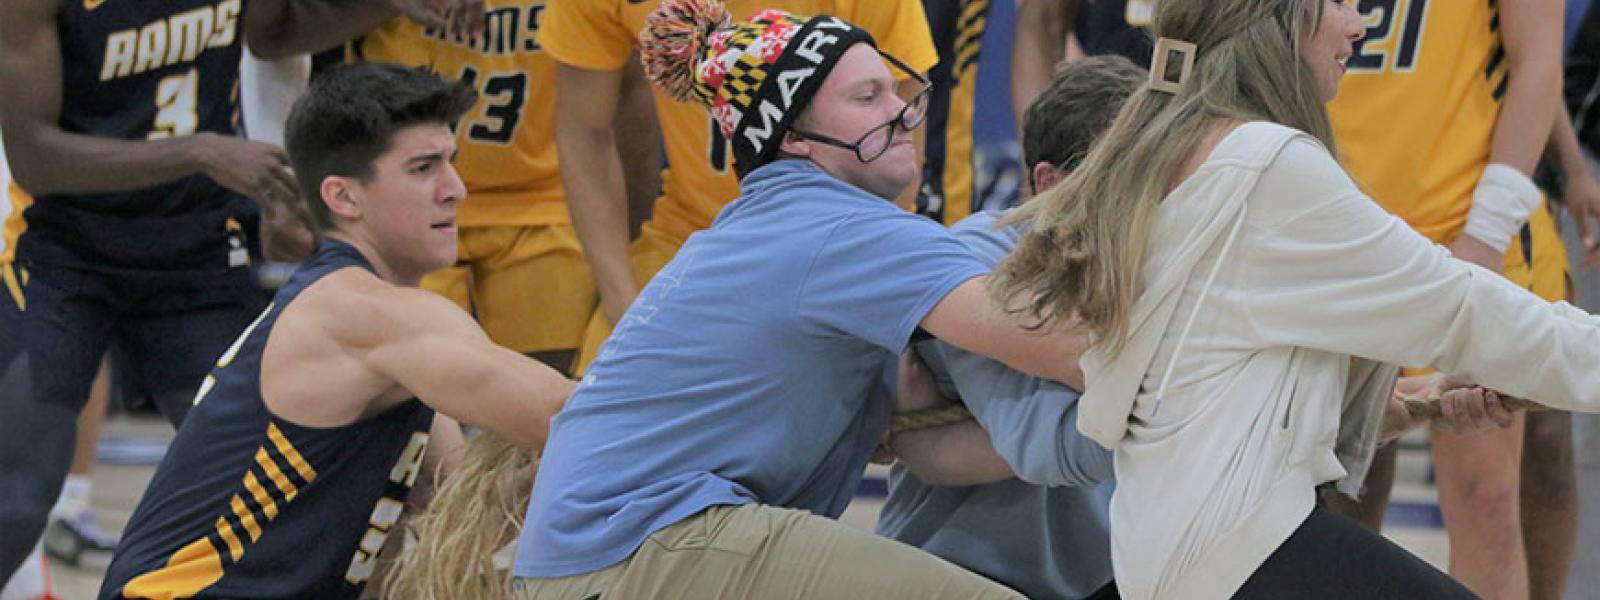 A Tug of War was part of the fun at Moore Madness. (Photos by Alexis Deason, CIU student photographer)